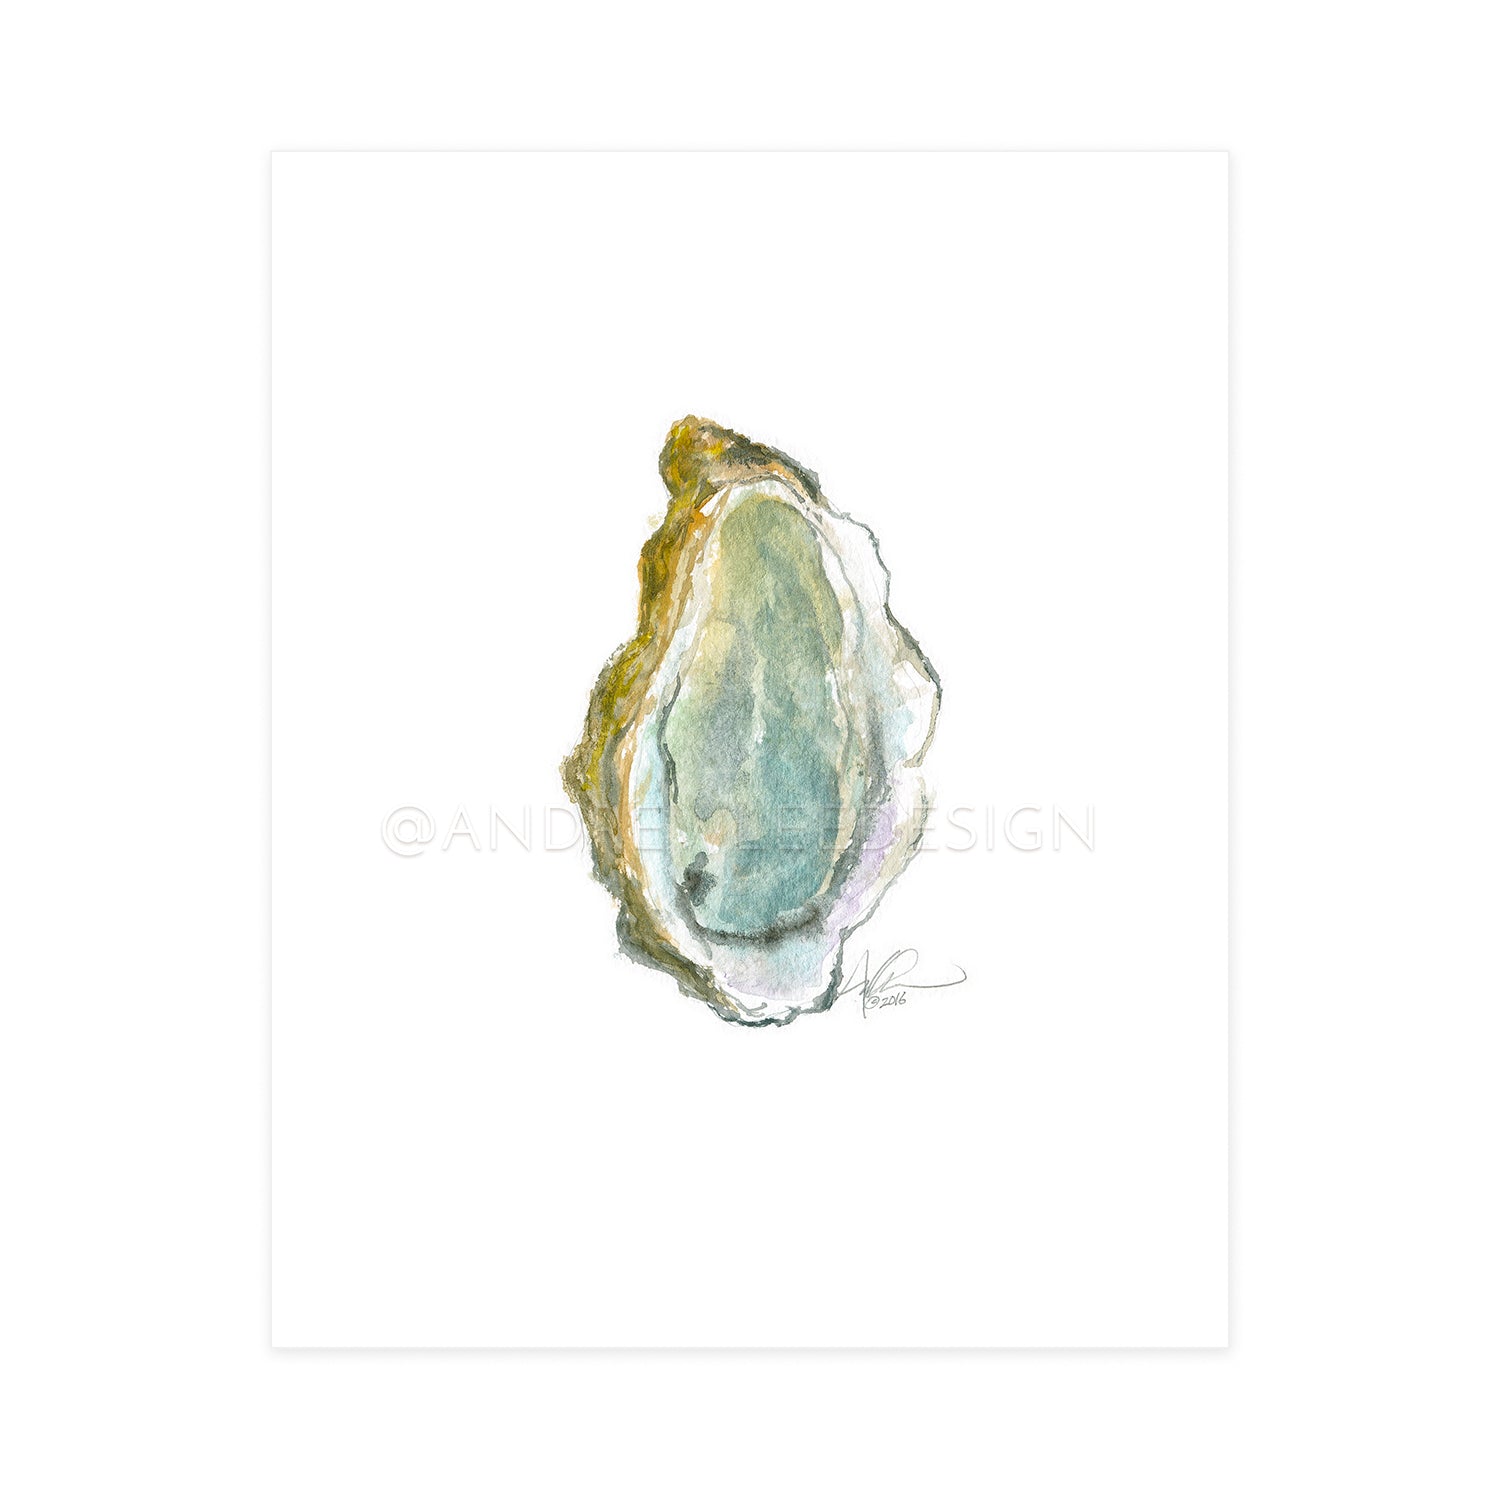 Oyster, Print #006